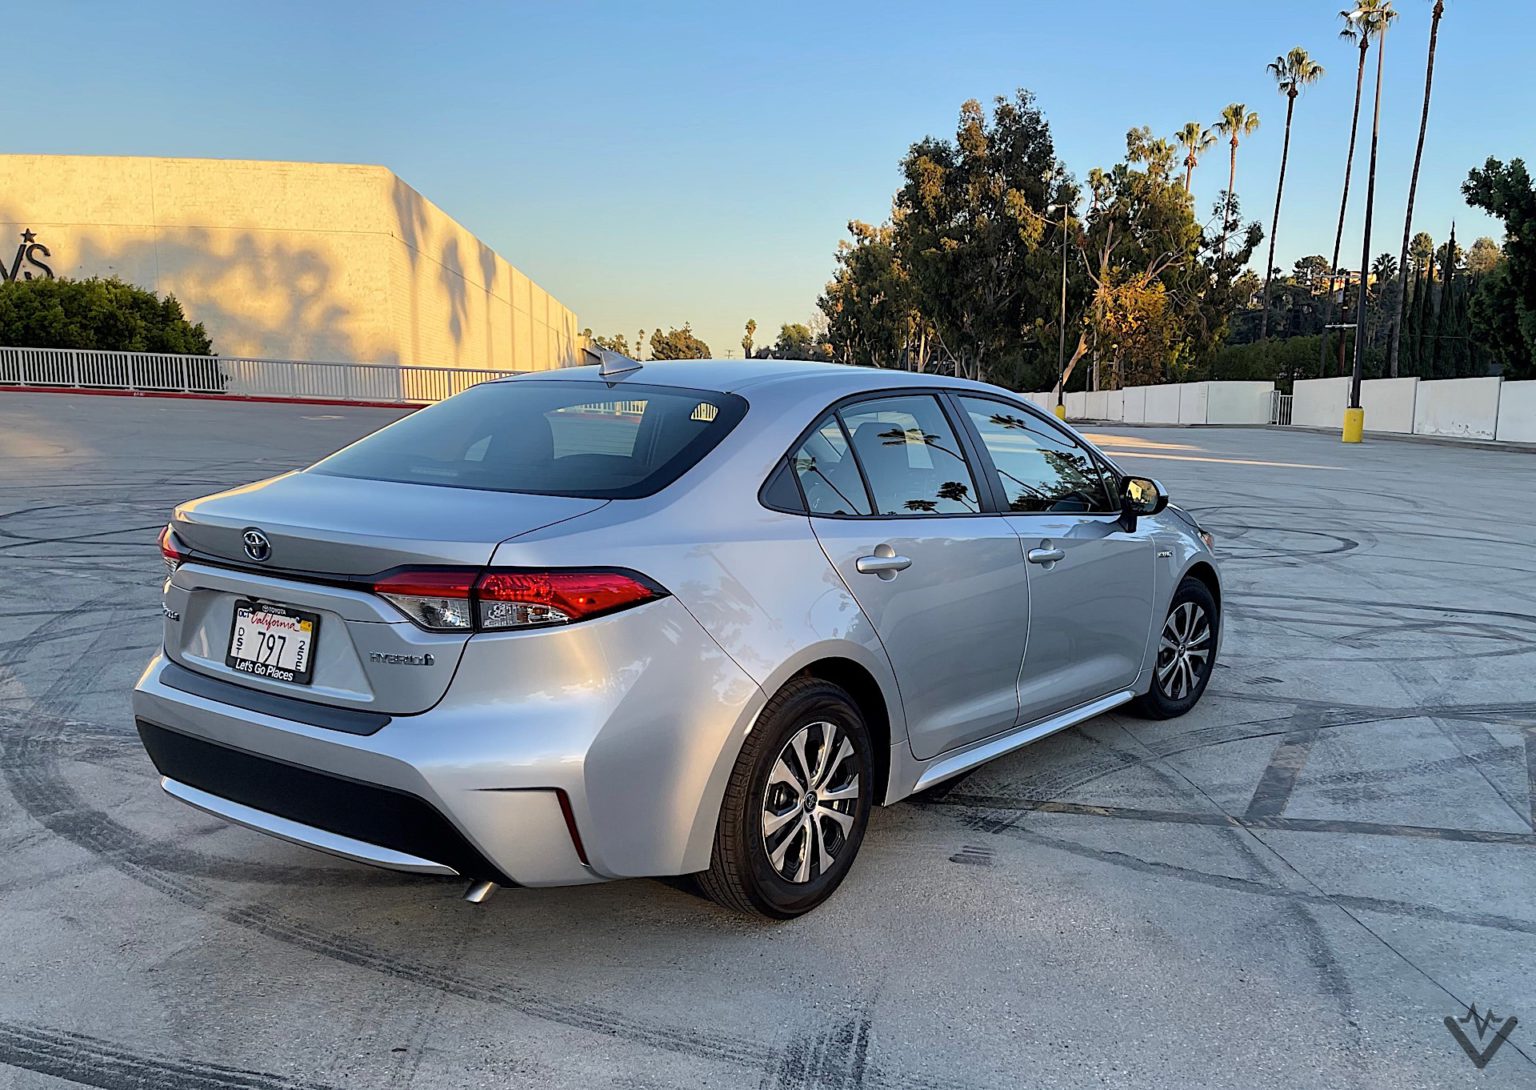 2021 Toyota Corolla Hybrid Review The Ultimate Miserly Commuter Ev Pulse